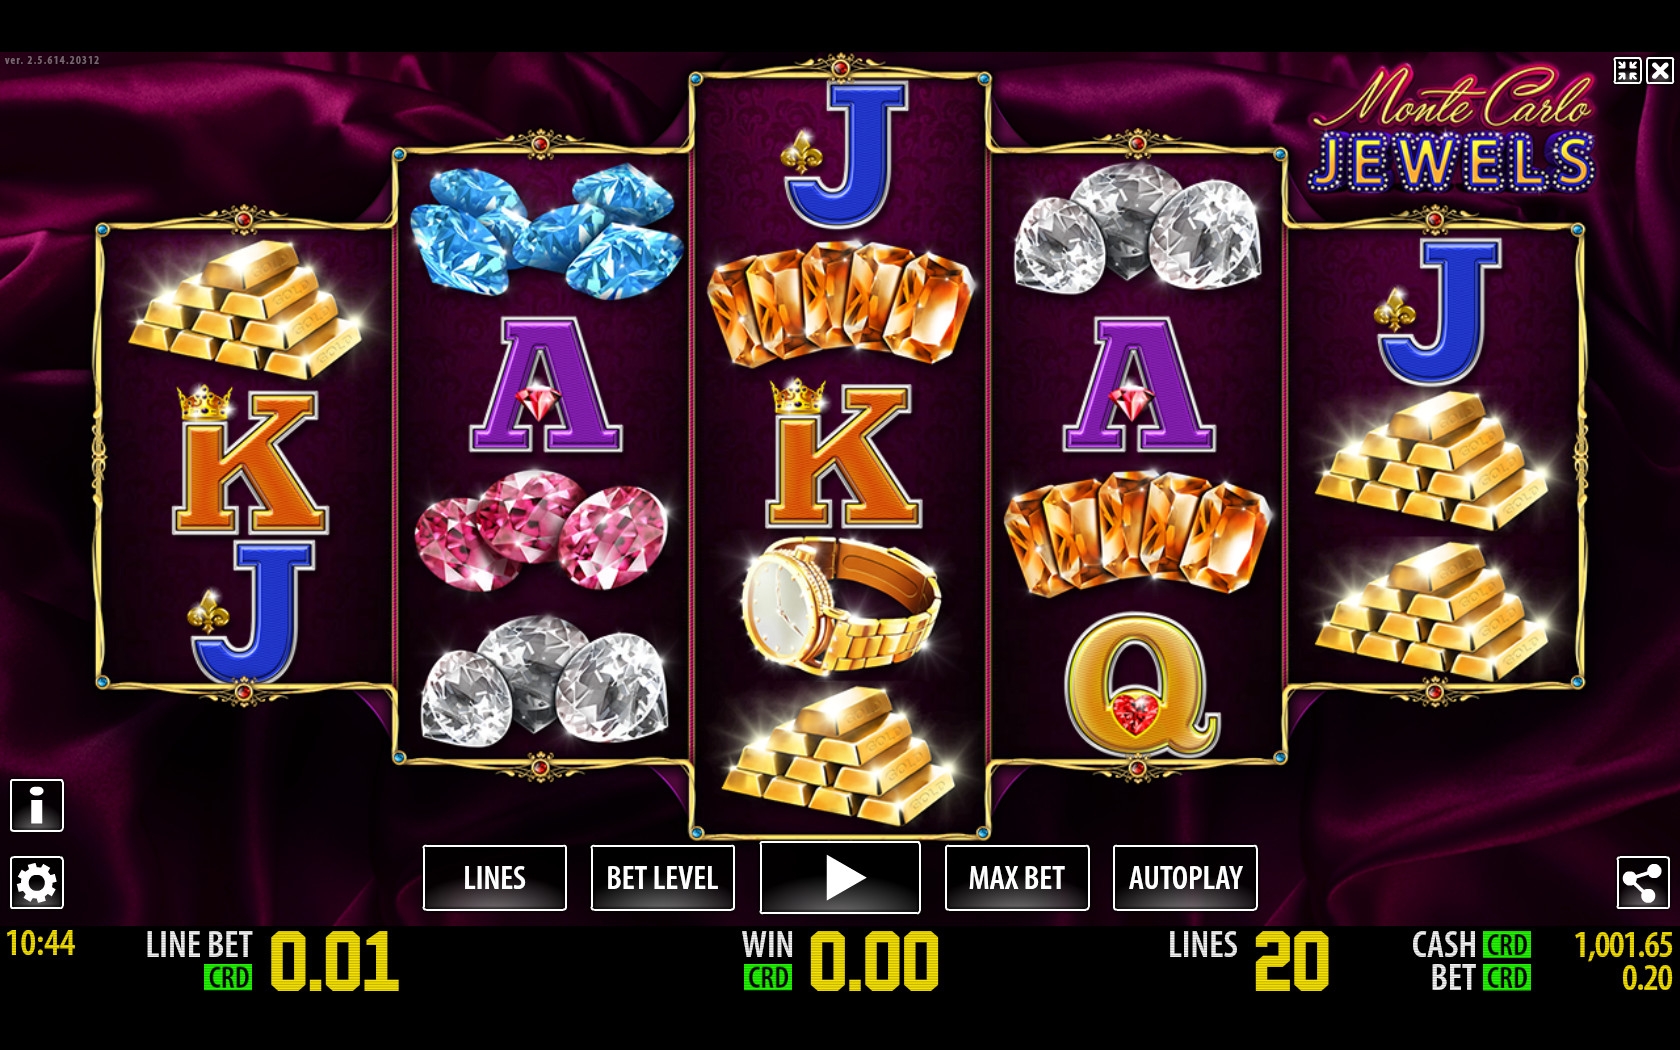 Monte Carlo Jewels (Monte Carlo Jewels) from category Slots